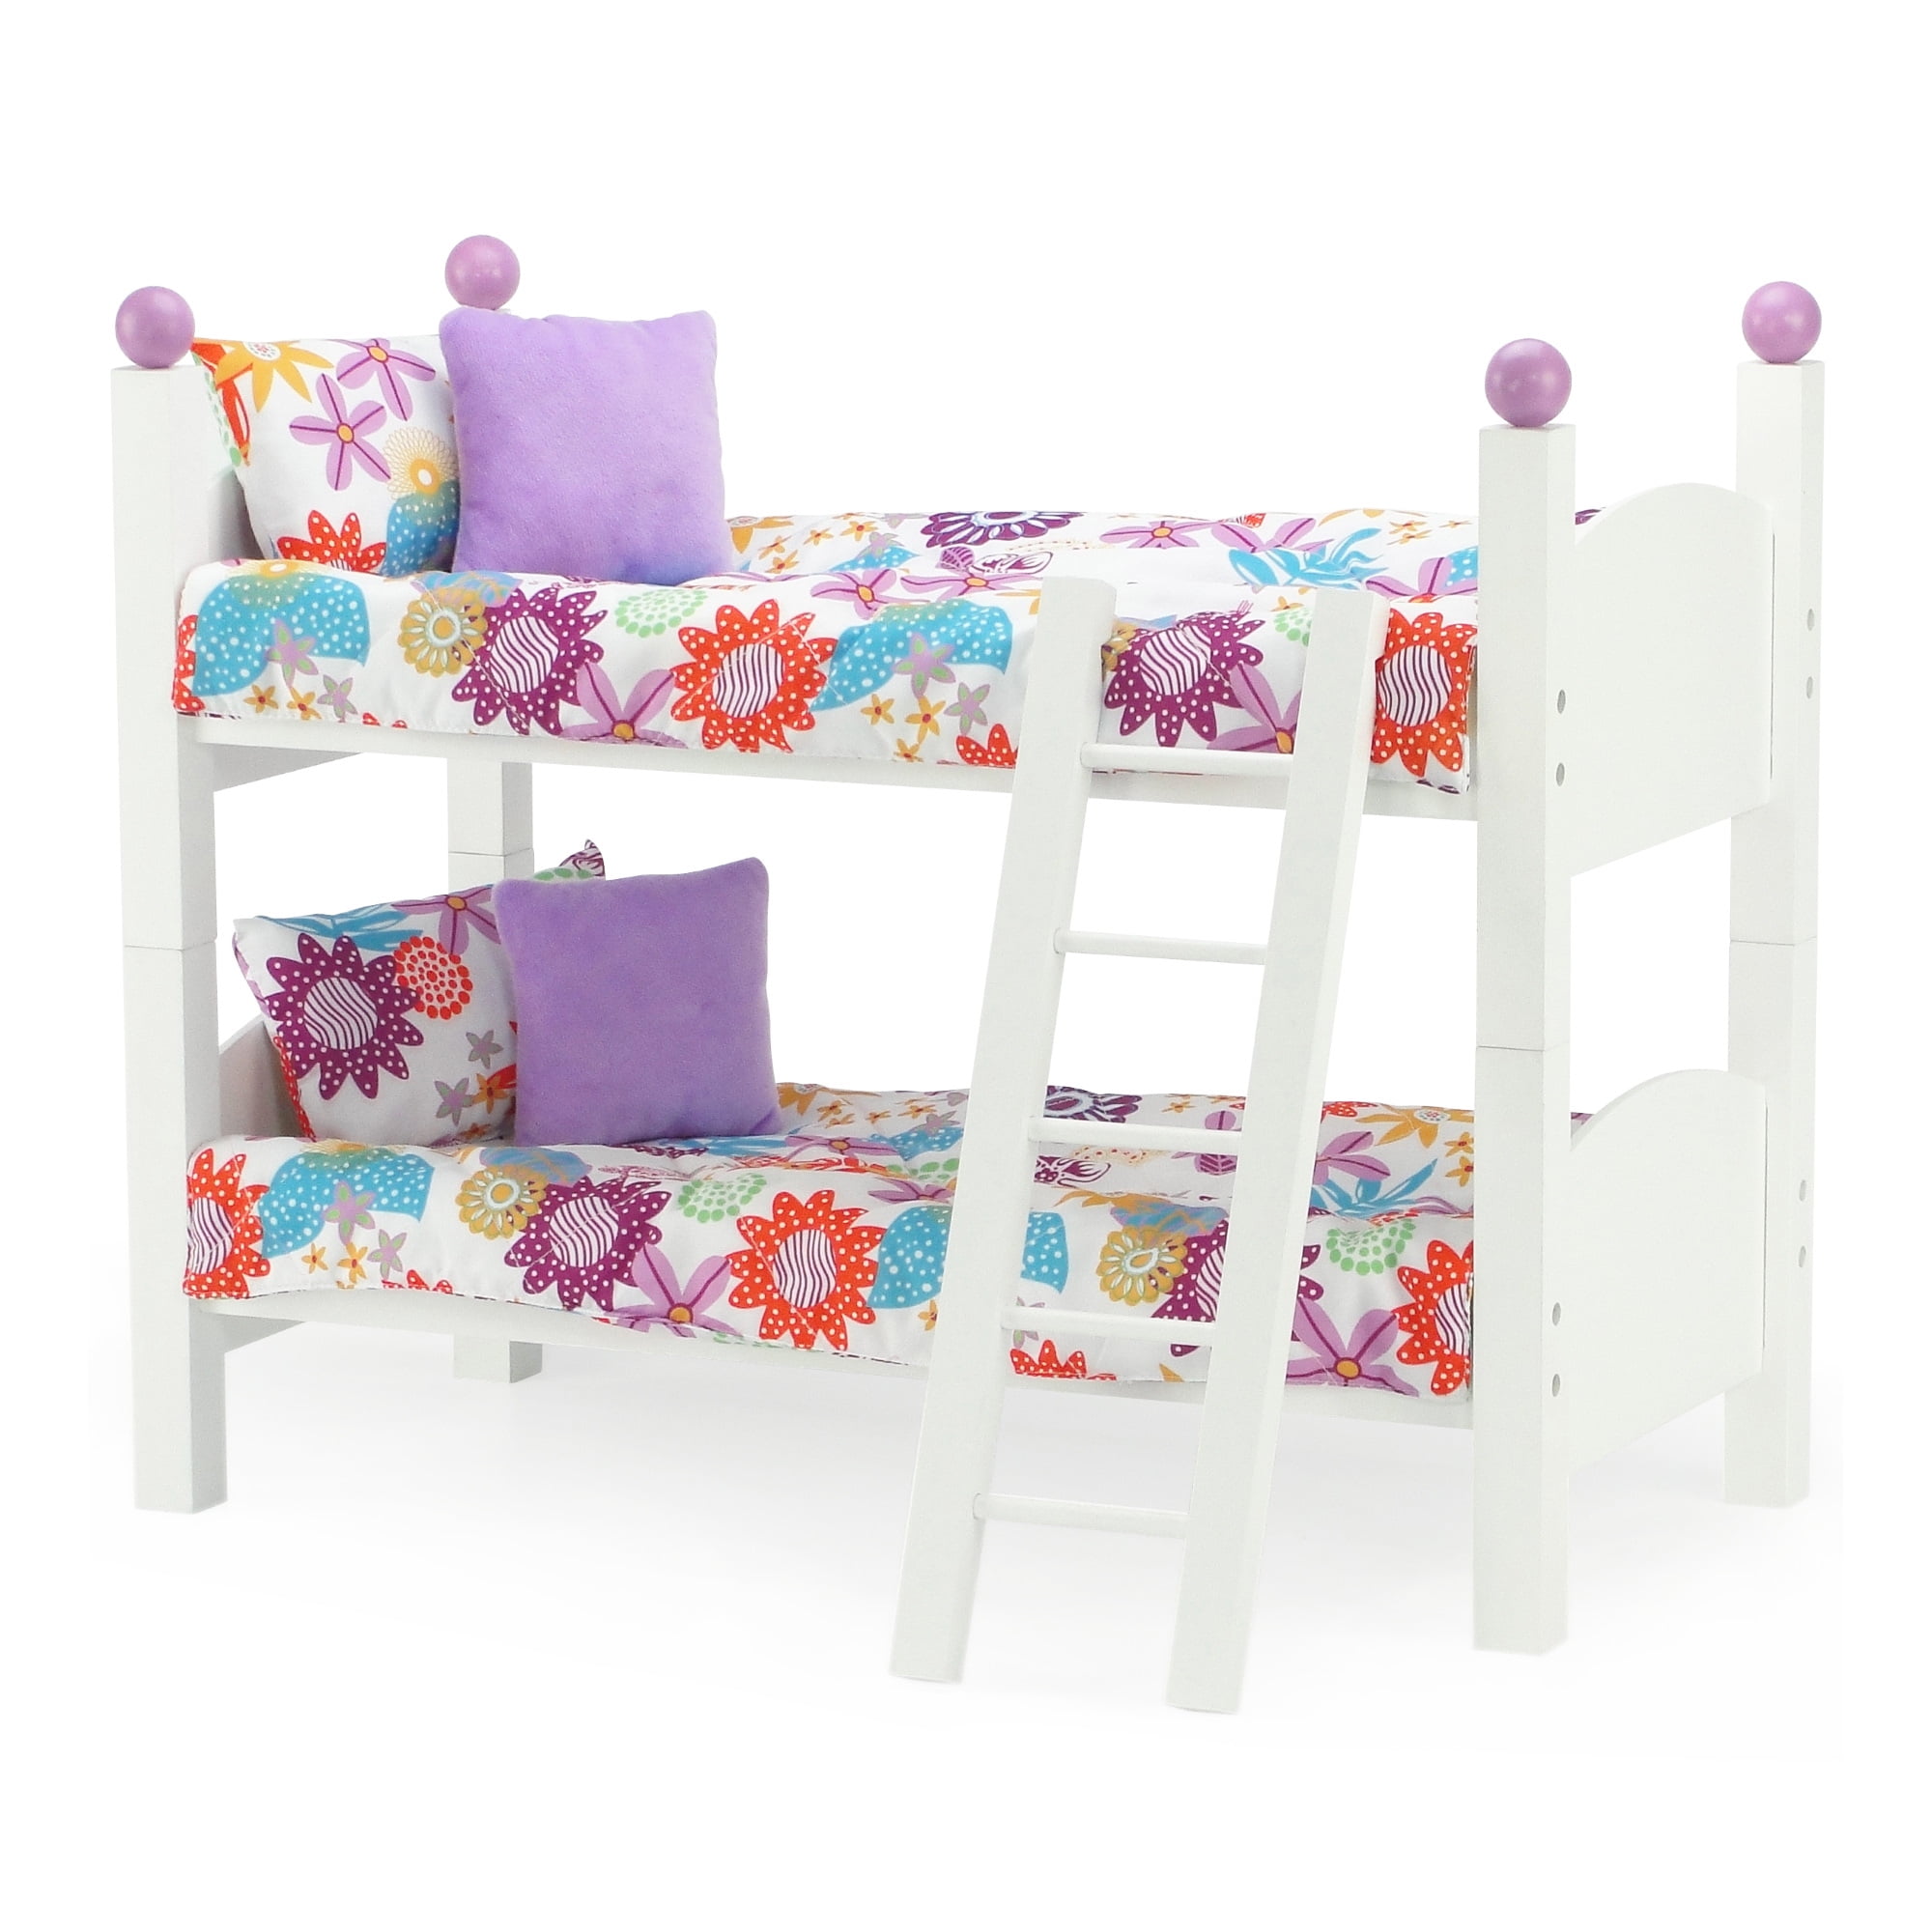 Emily Rose 18 Inch Doll Bunk Bed, Bunk Beds For Journey Dolls